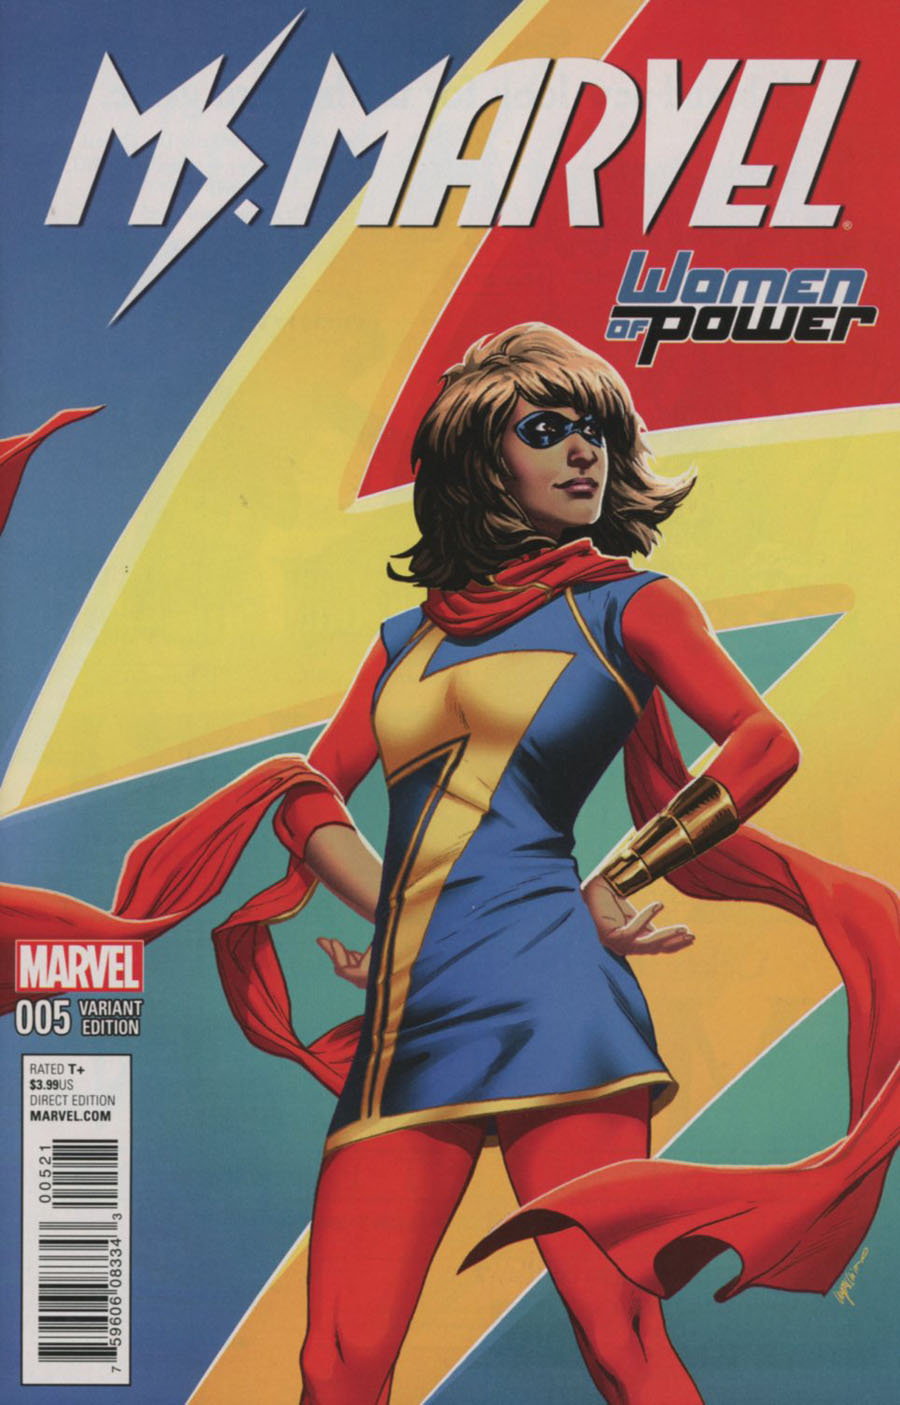 Ms Marvel Vol 4 #5 Cover B Variant Emanuela Lupacchino Women Of Power Cover